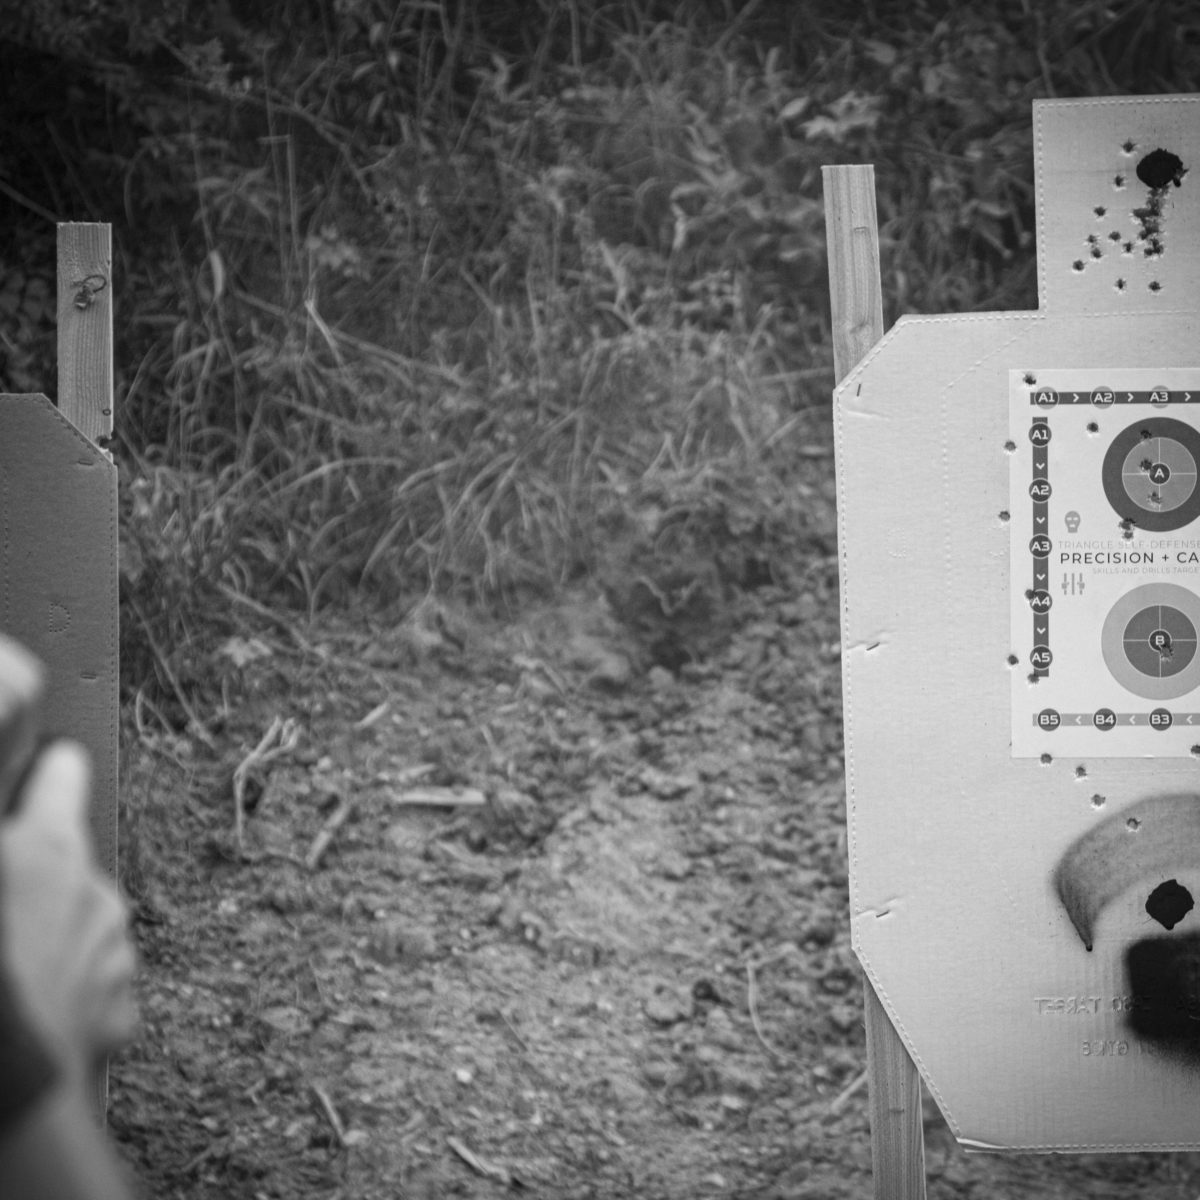 shooting drills to help you improve your shooting and gun safety